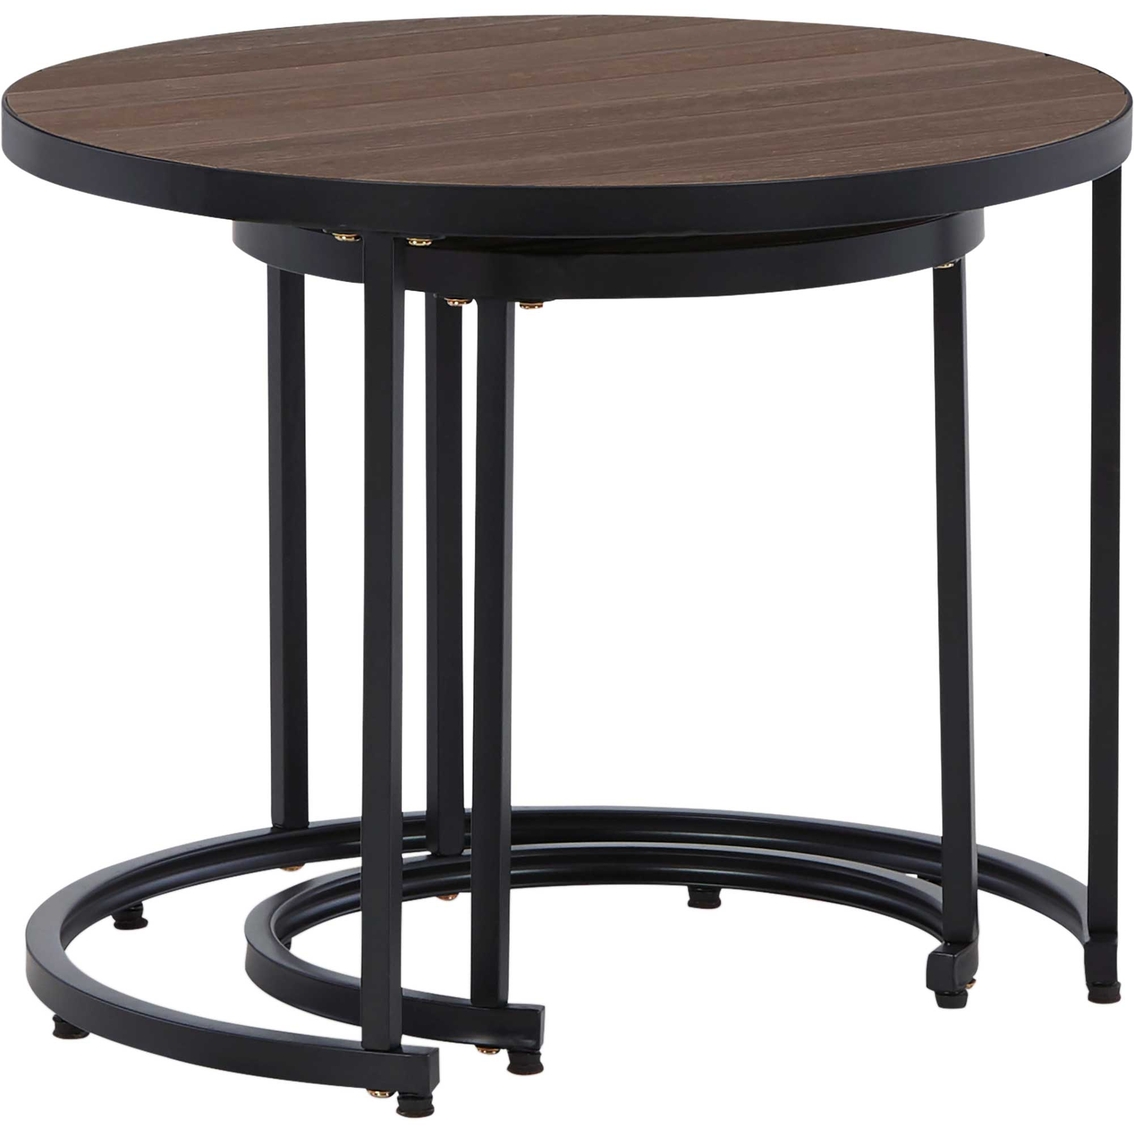 Signature Design by Ashley Ayla Outdoor Nesting End Tables - Image 2 of 6